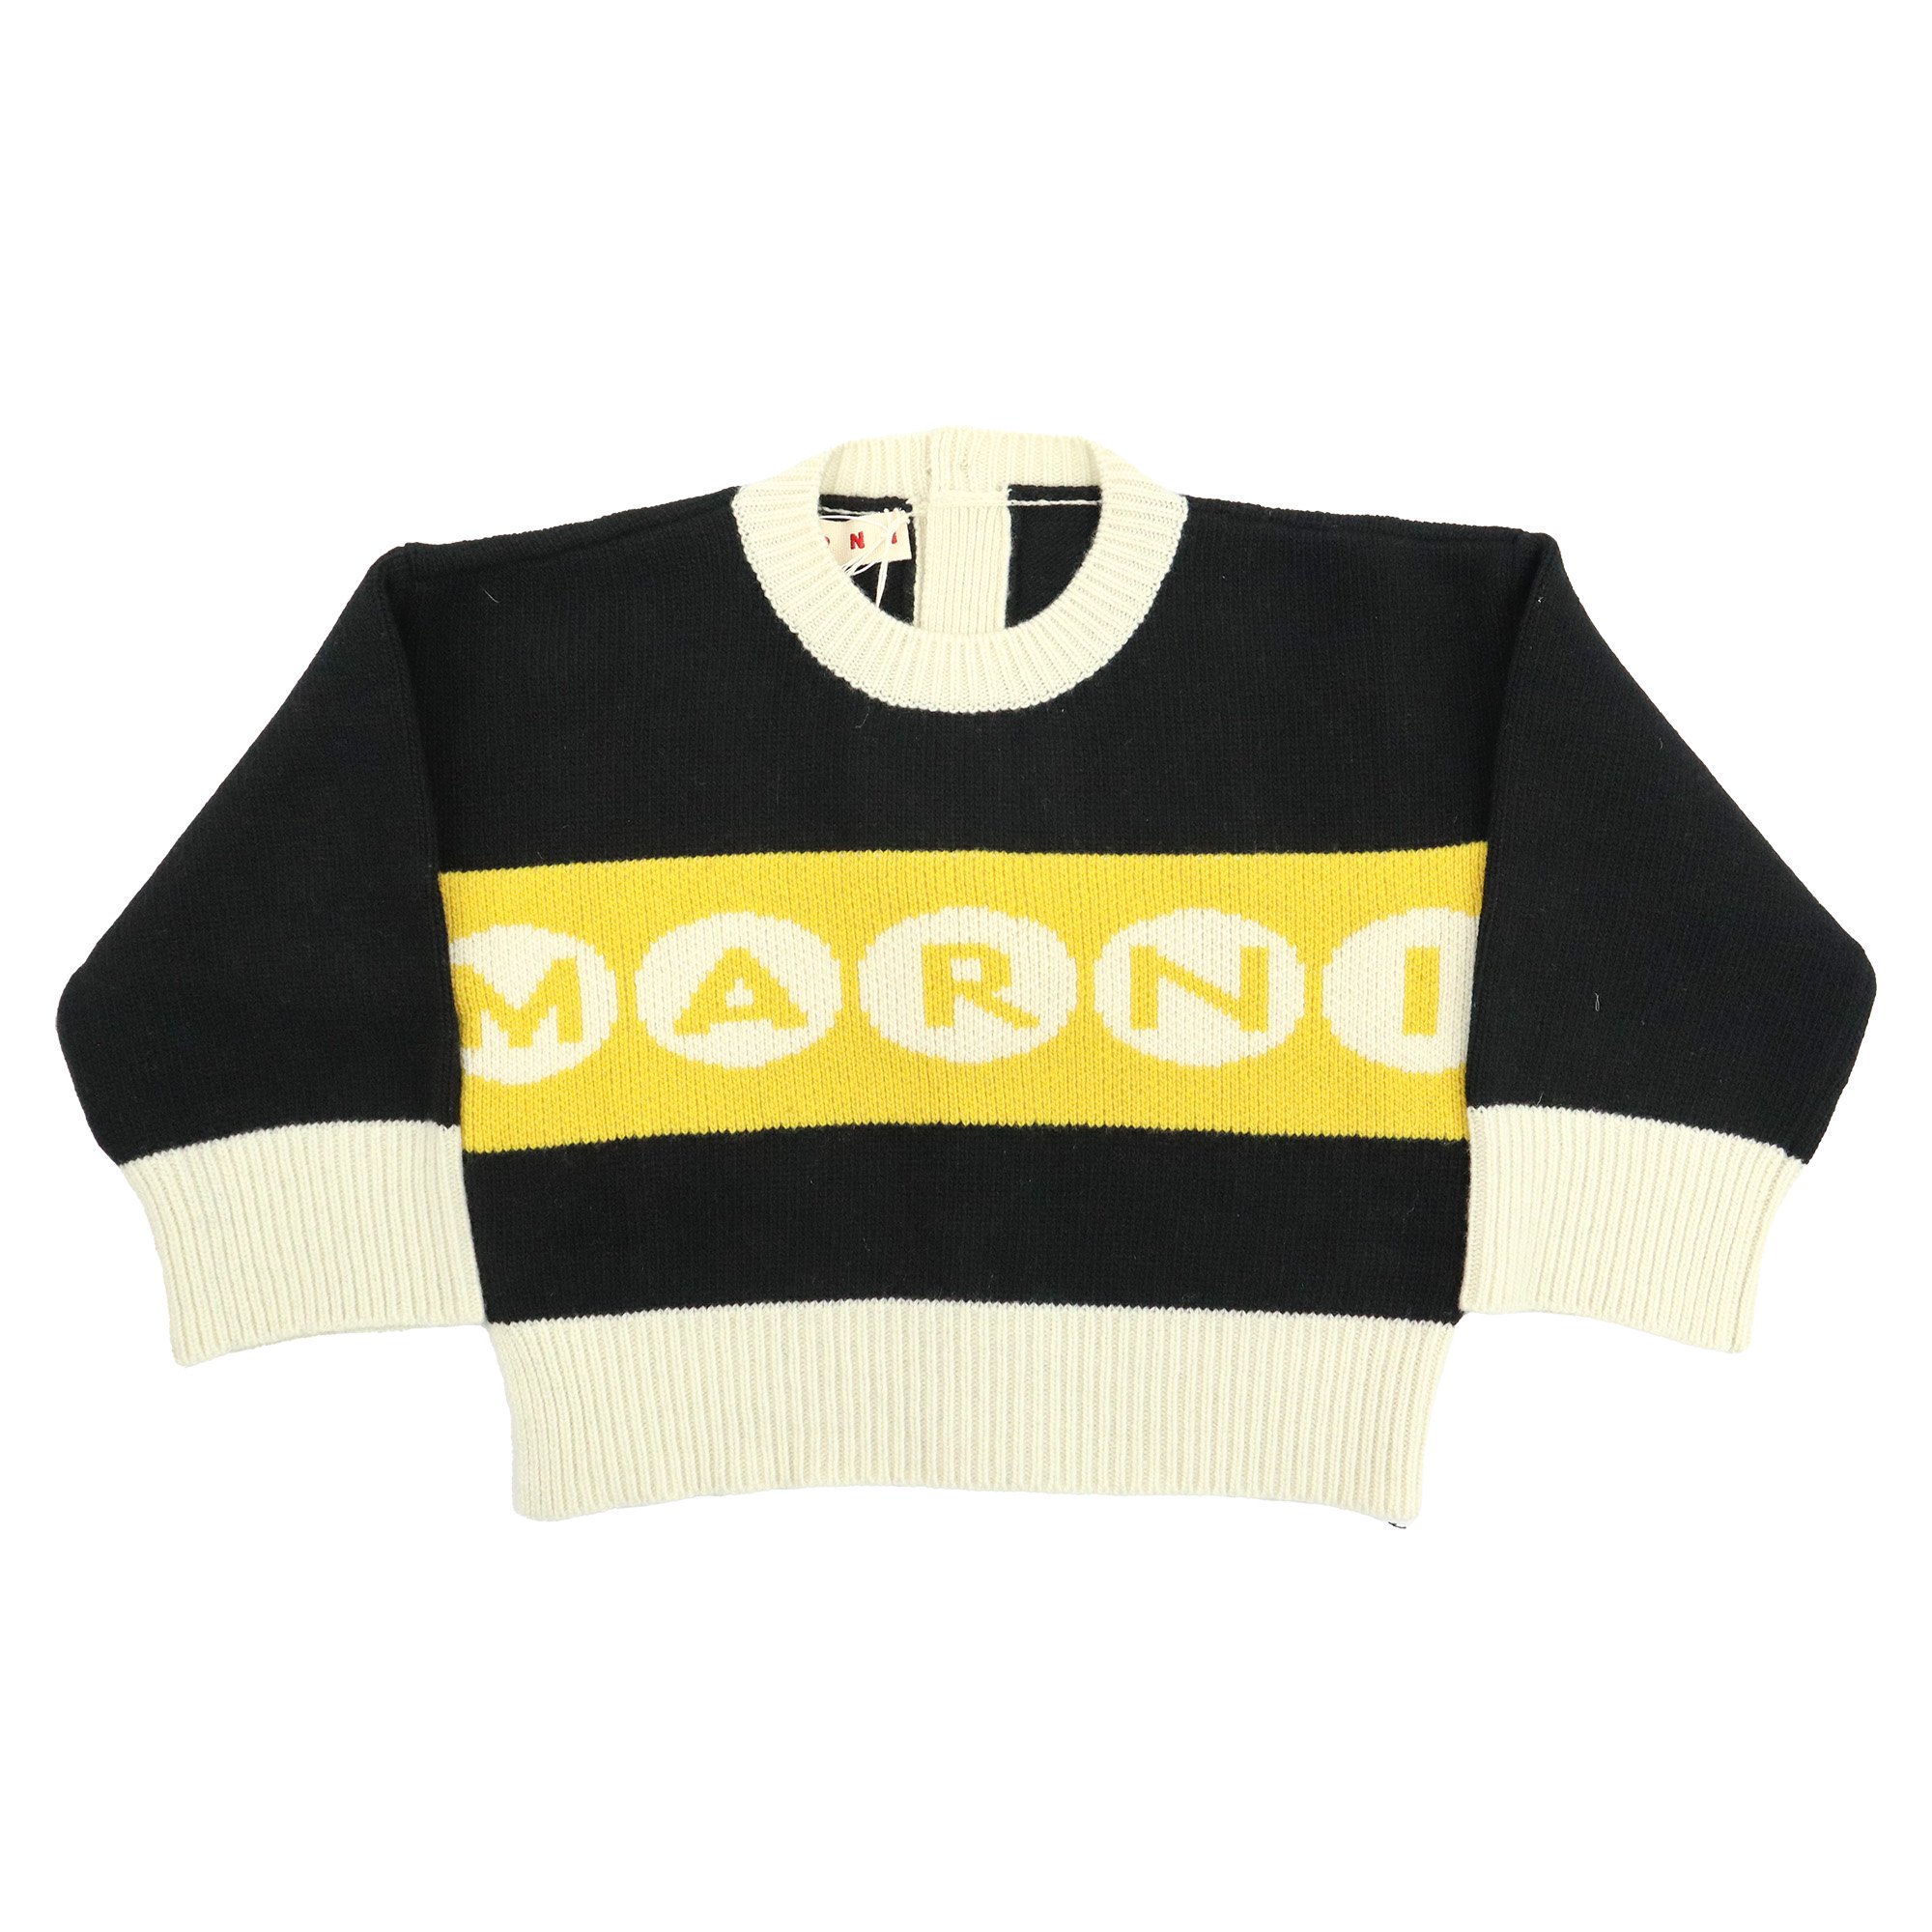 <img class='new_mark_img1' src='https://img.shop-pro.jp/img/new/icons47.gif' style='border:none;display:inline;margin:0px;padding:0px;width:auto;' />MARNI KNIT【YELLOW】